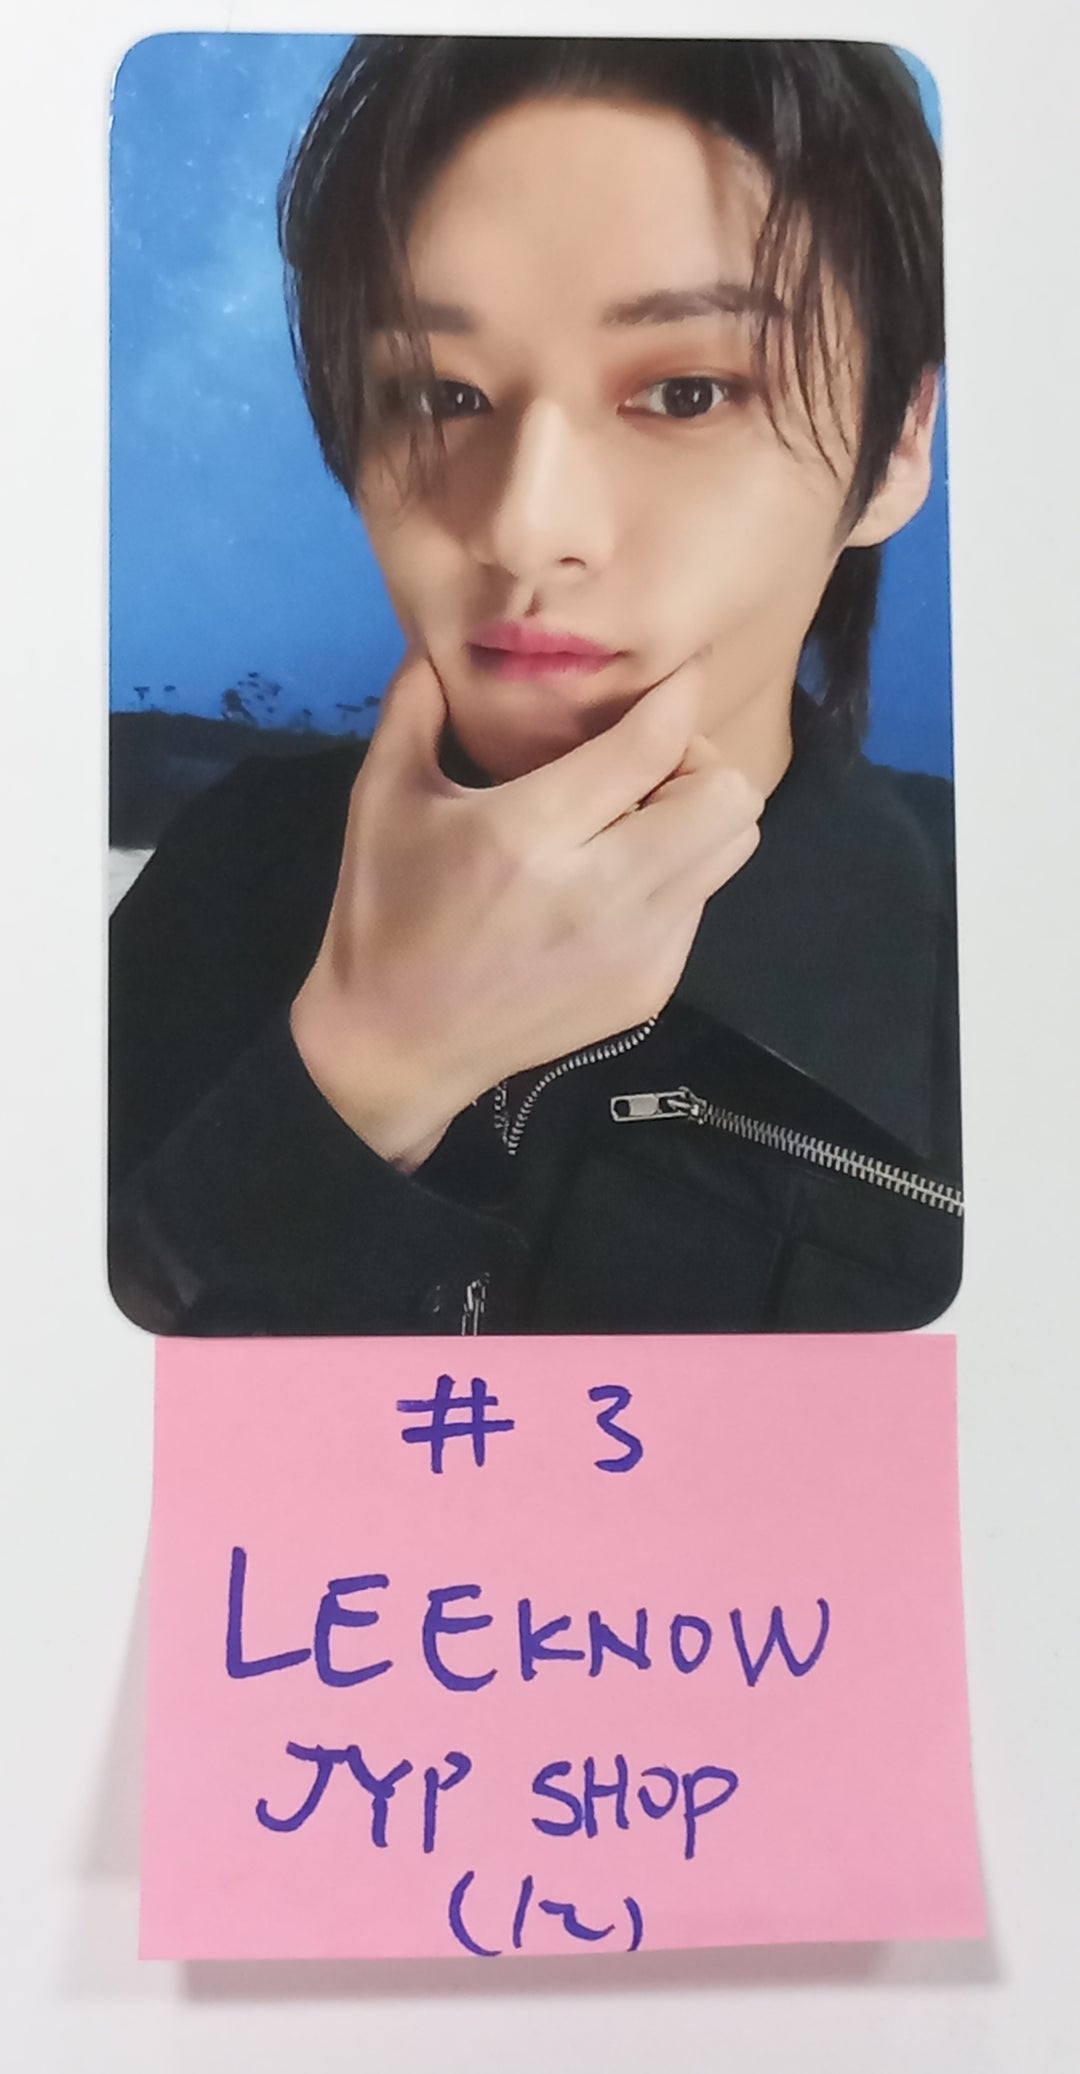 Stray Kids "PILOT : FOR ★★★★★" - JYP Shop MD Event Photocard [23.10.10]